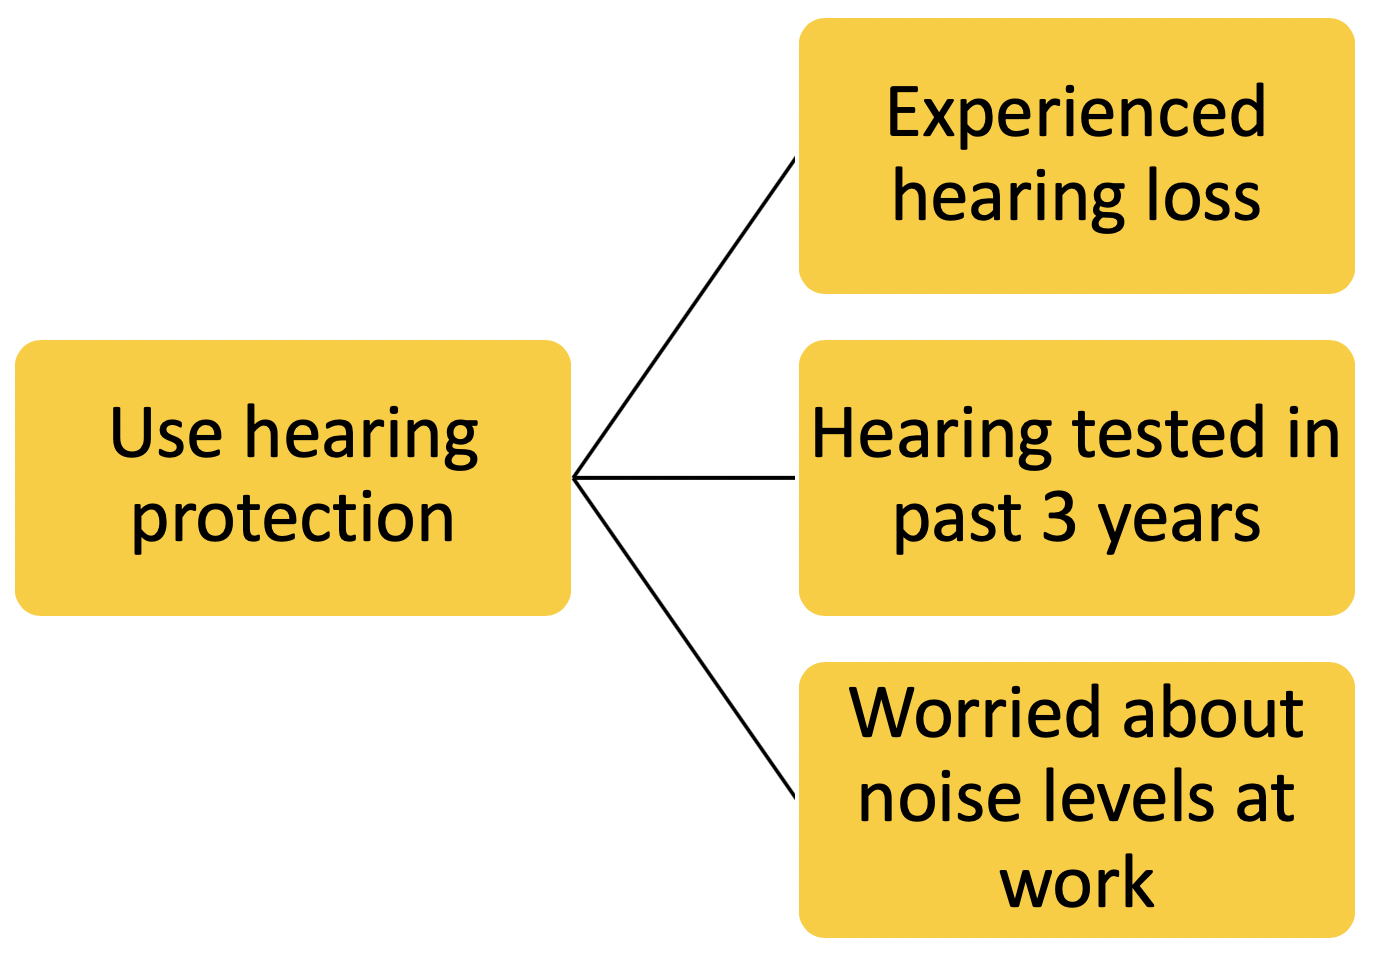 Factors affecting hearing protection use